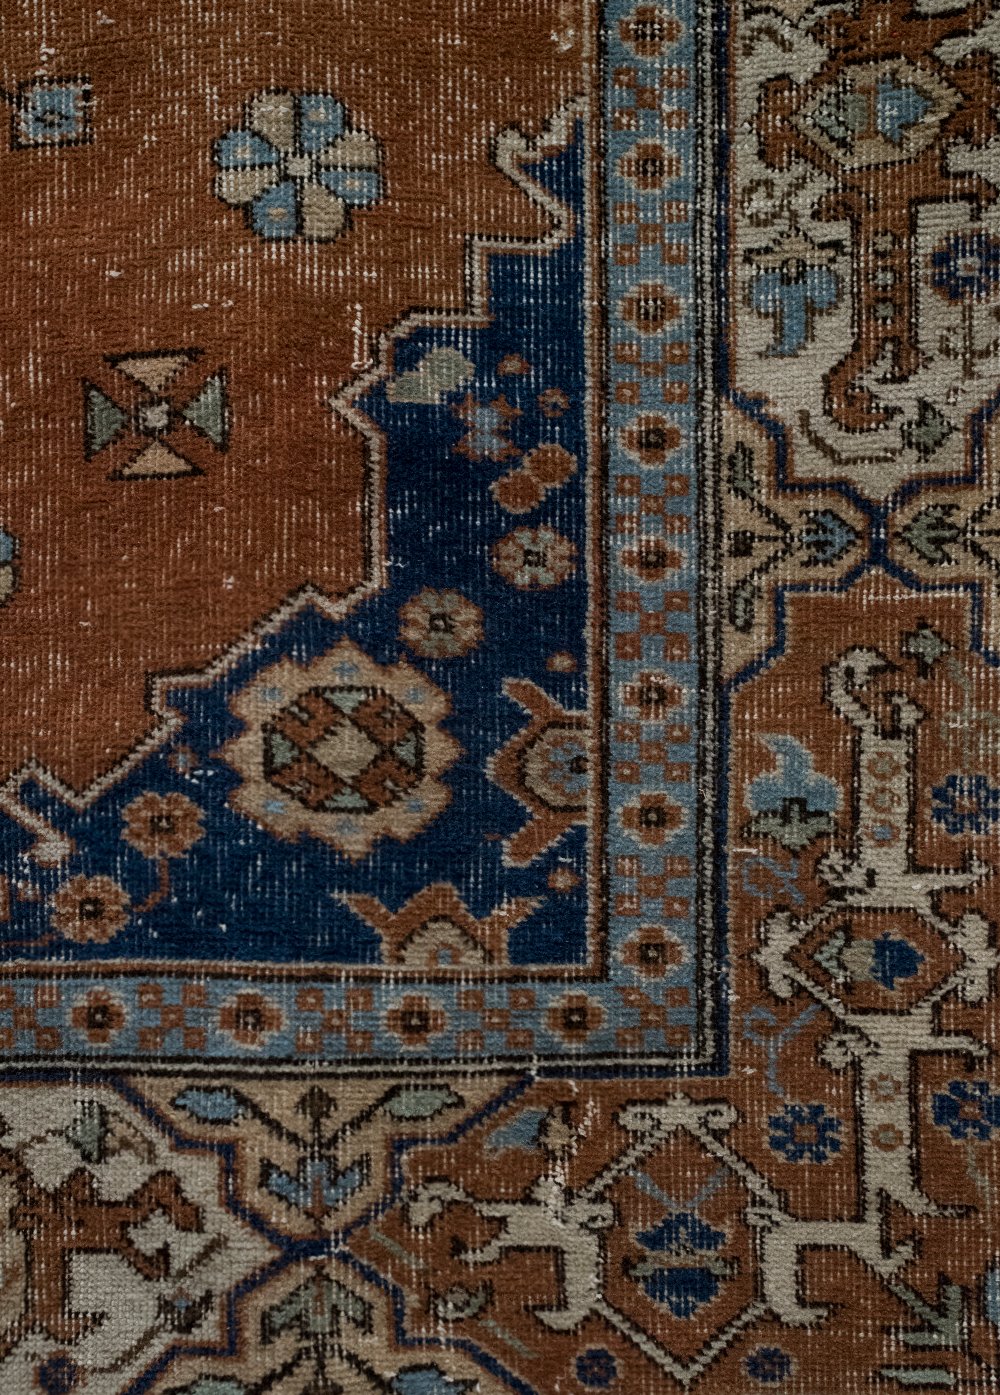 Keywords to Use When Searching for Large Vintage Rugs - roomfortuesday.com